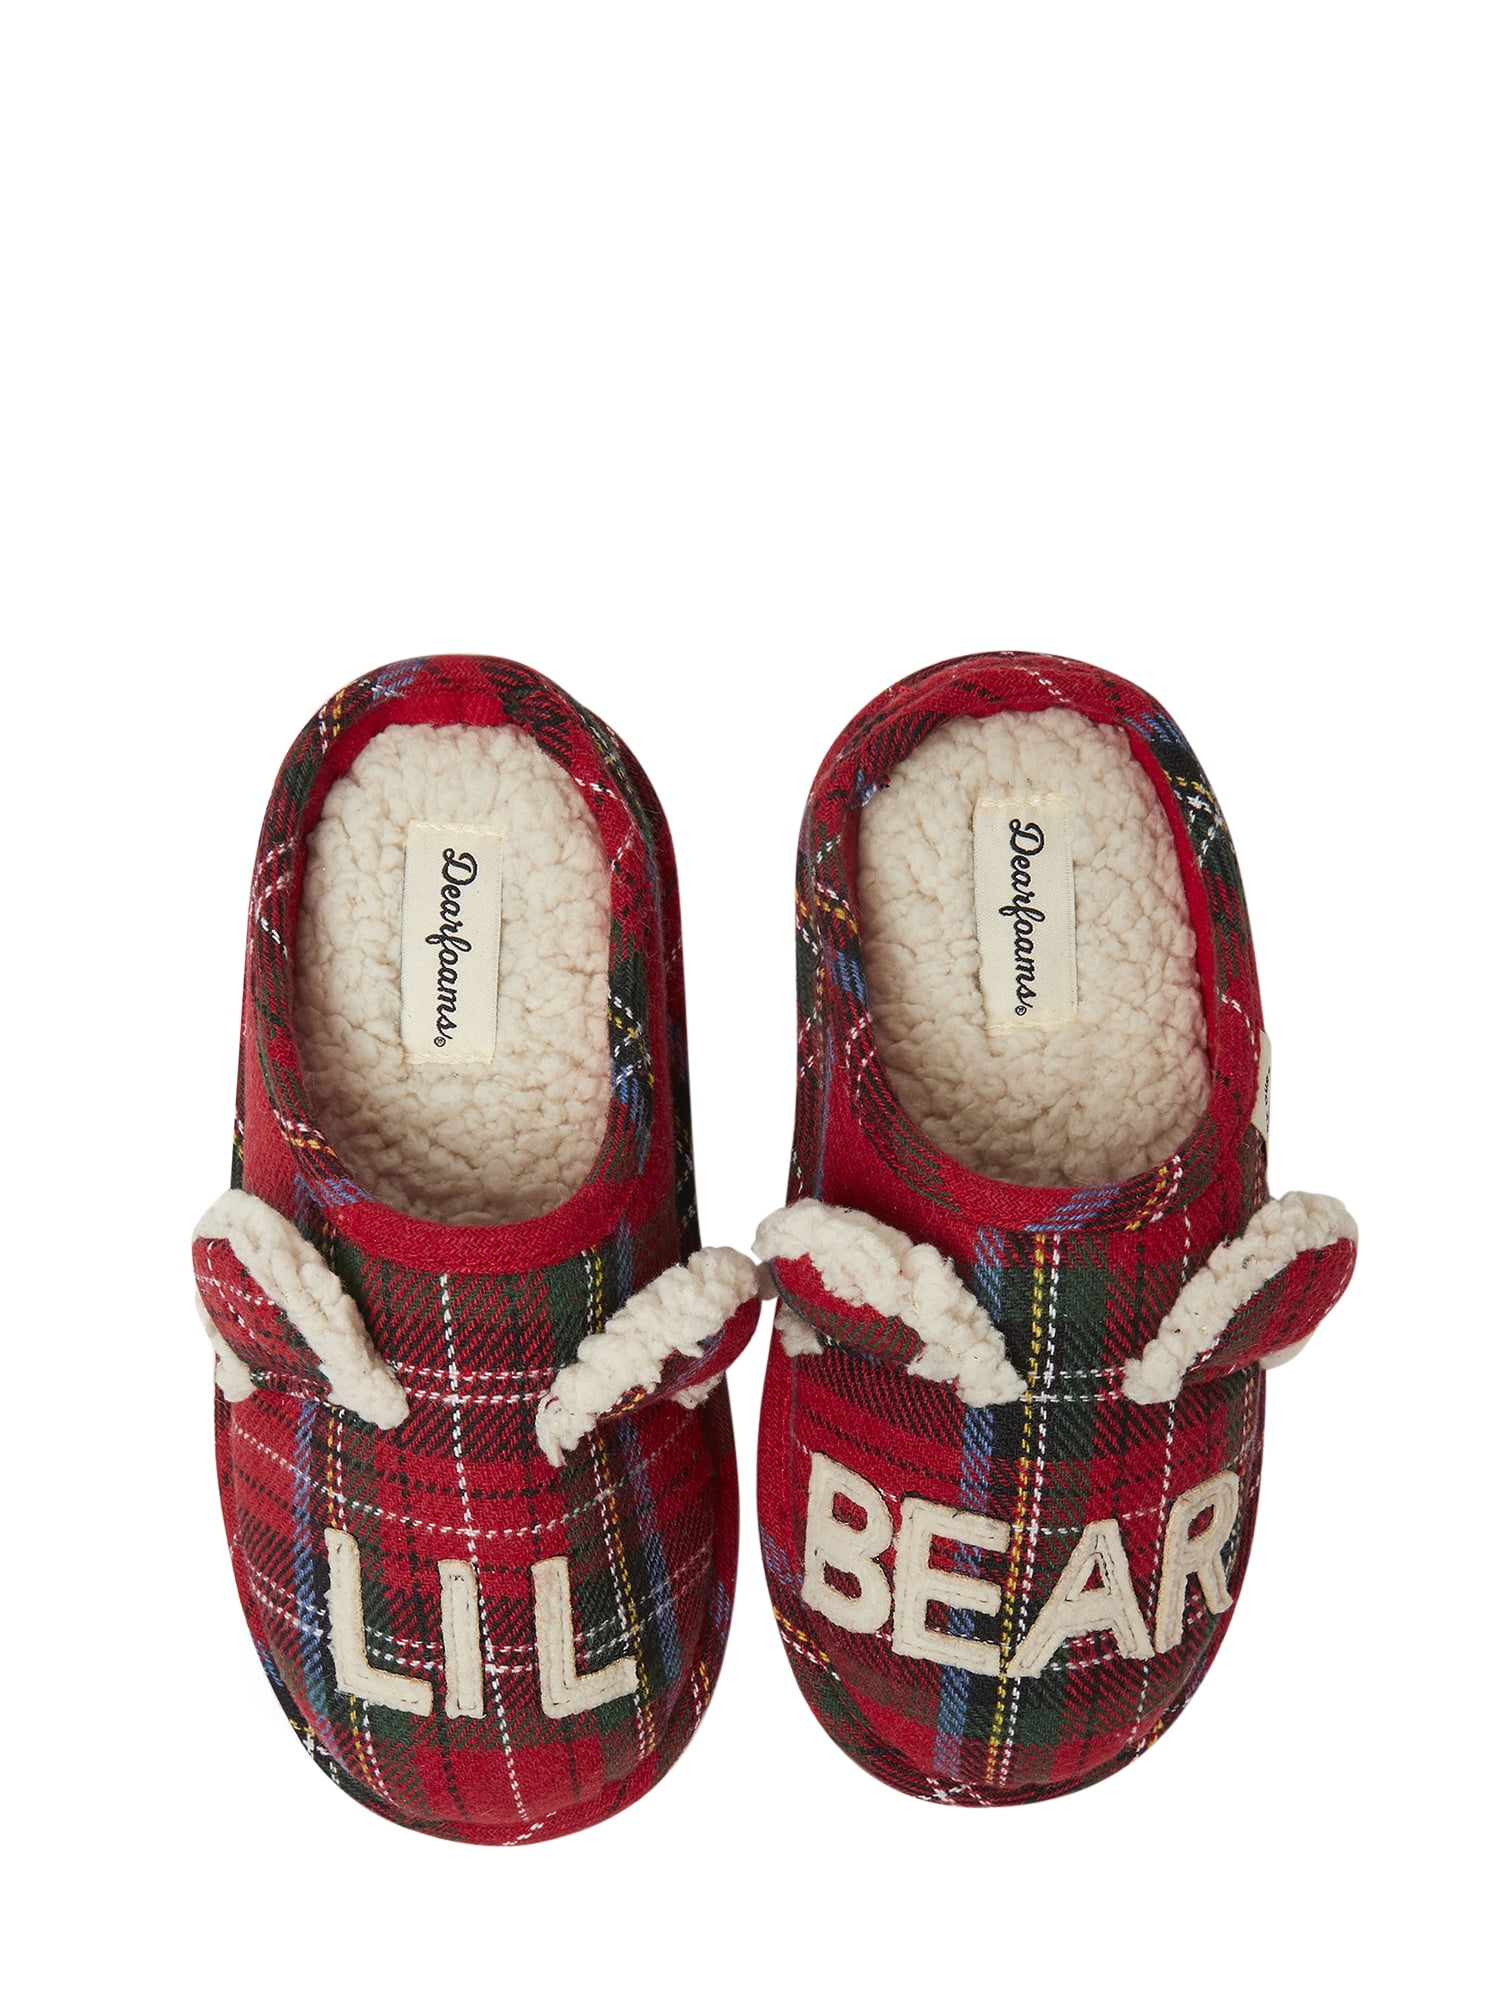 Dearfoams Kids Plaid Moccasin with Pile Lining Slipper 